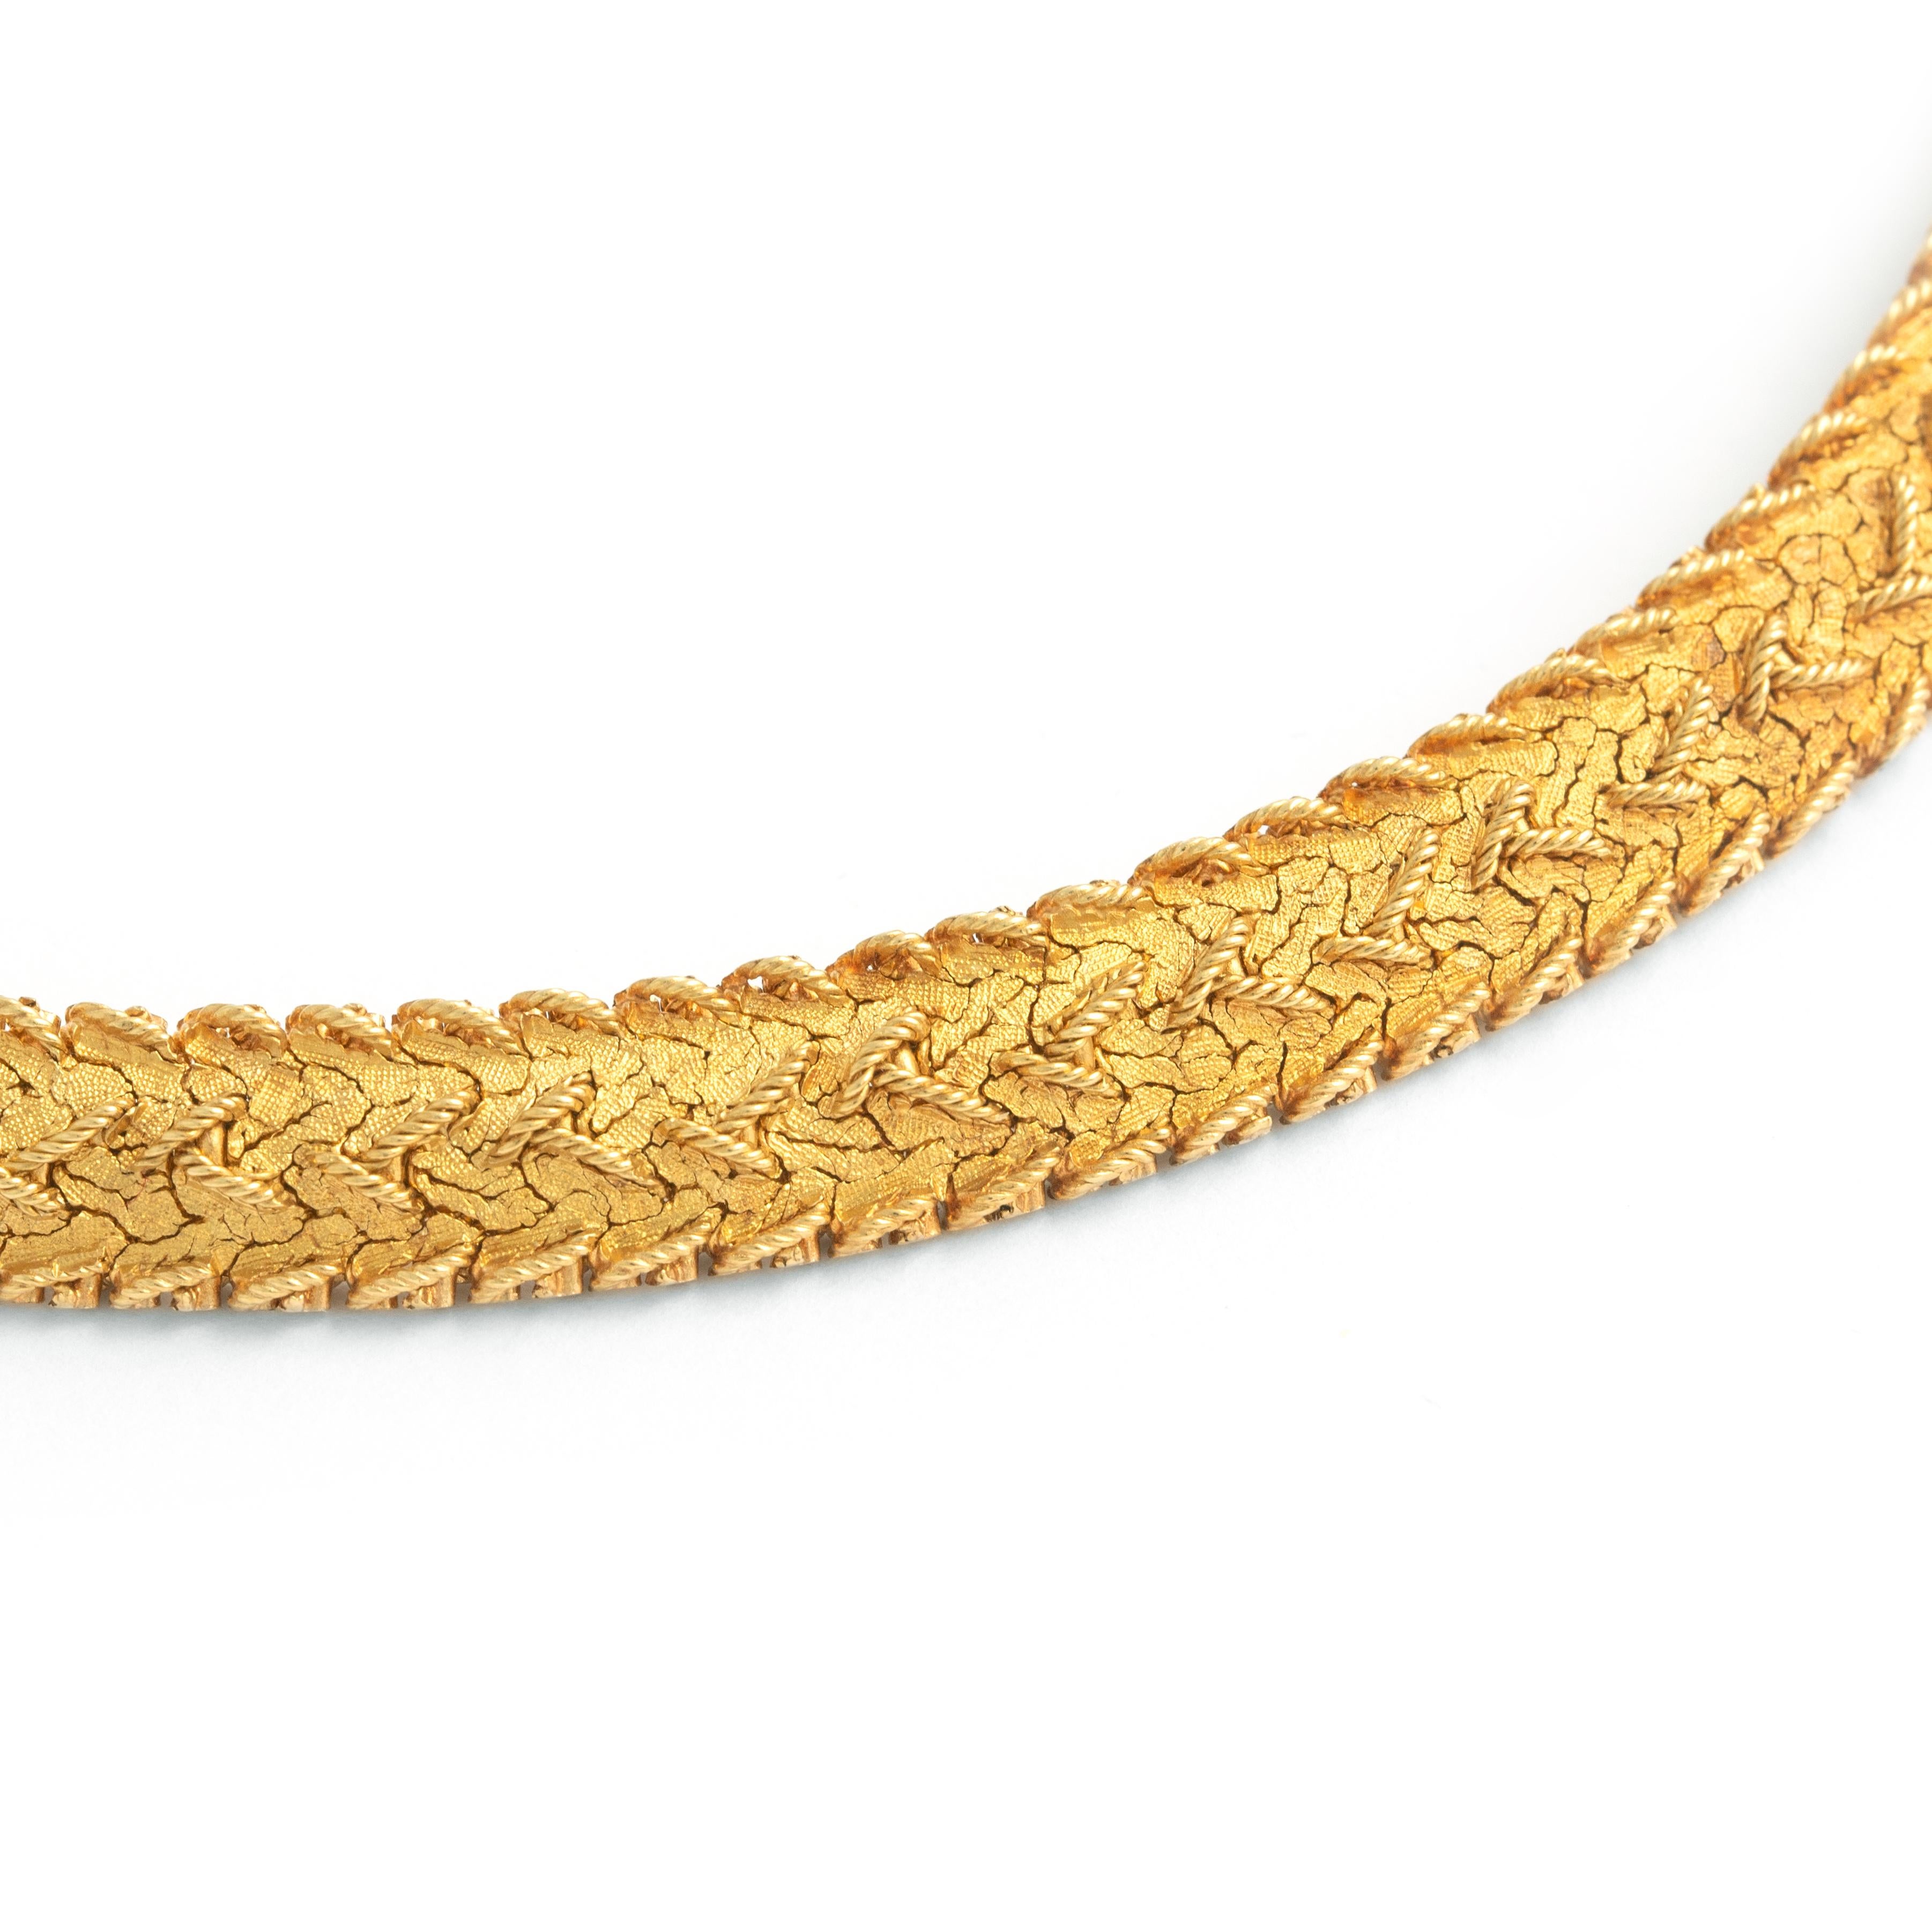 French Vintage Yellow Gold 18K Necklace.
Circa 1960. French marks.

Dimensions:
Length: approx. 40.00 centimeters.
Width: 0.80 centimeters.
Thickness: 0.20 centimeters.

Total gross weight: 83.60 grams.